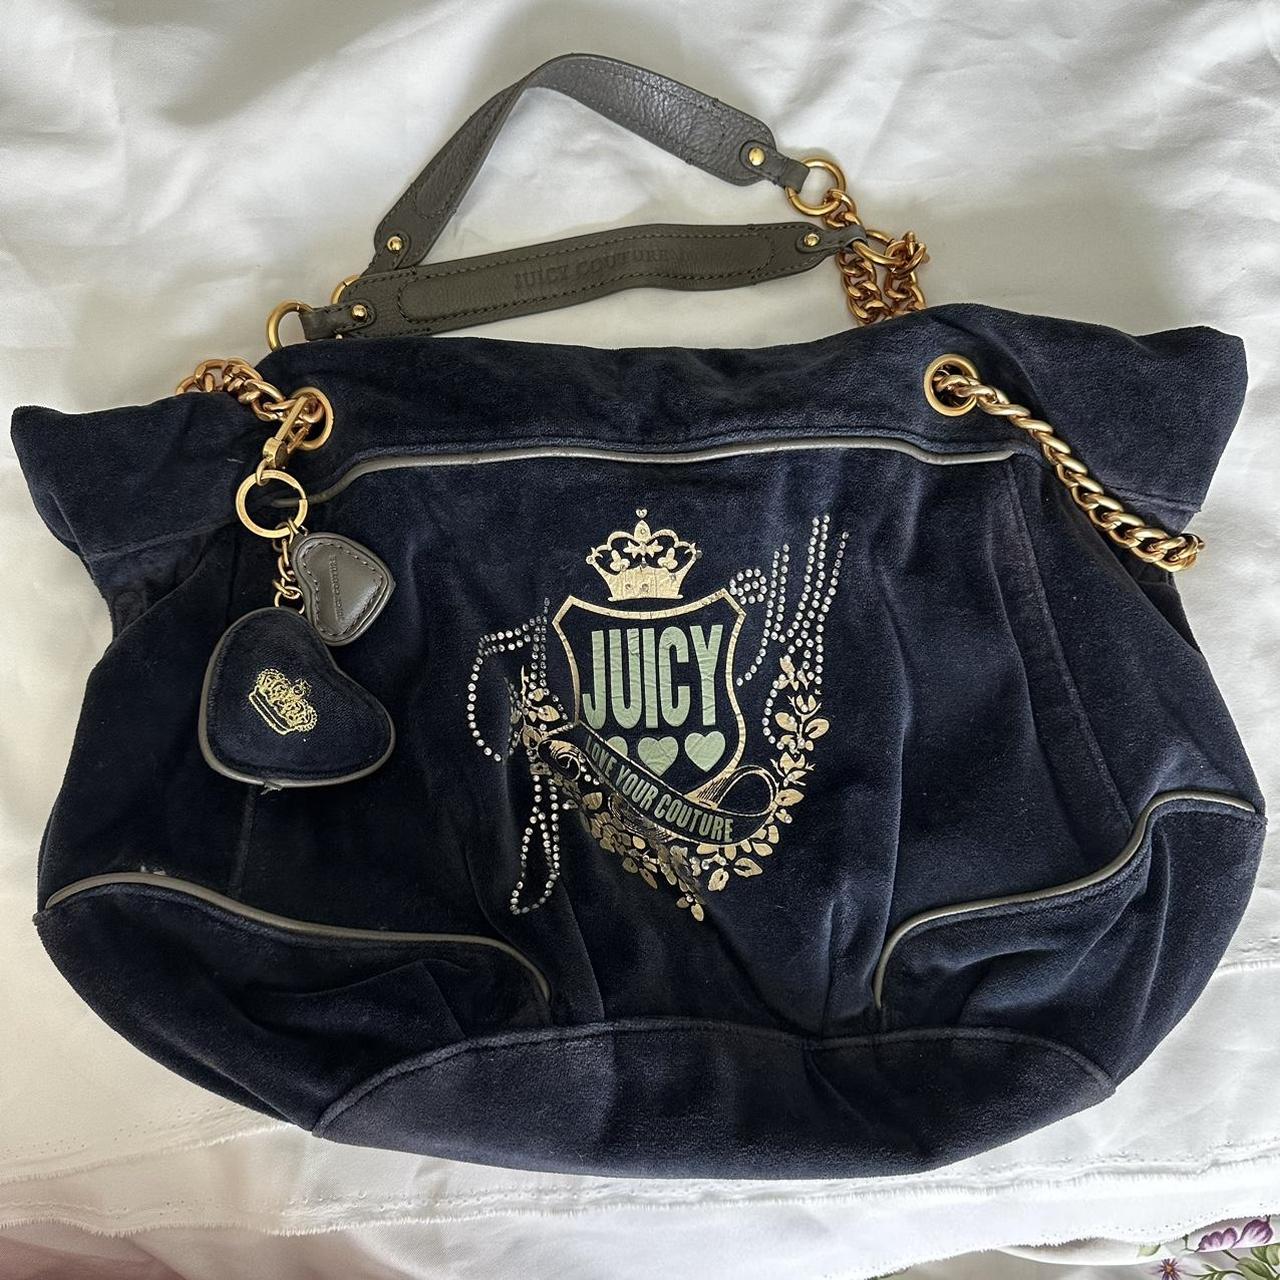 Juicy Couture Purse Blue - $40 (33% Off Retail) - From Kaya